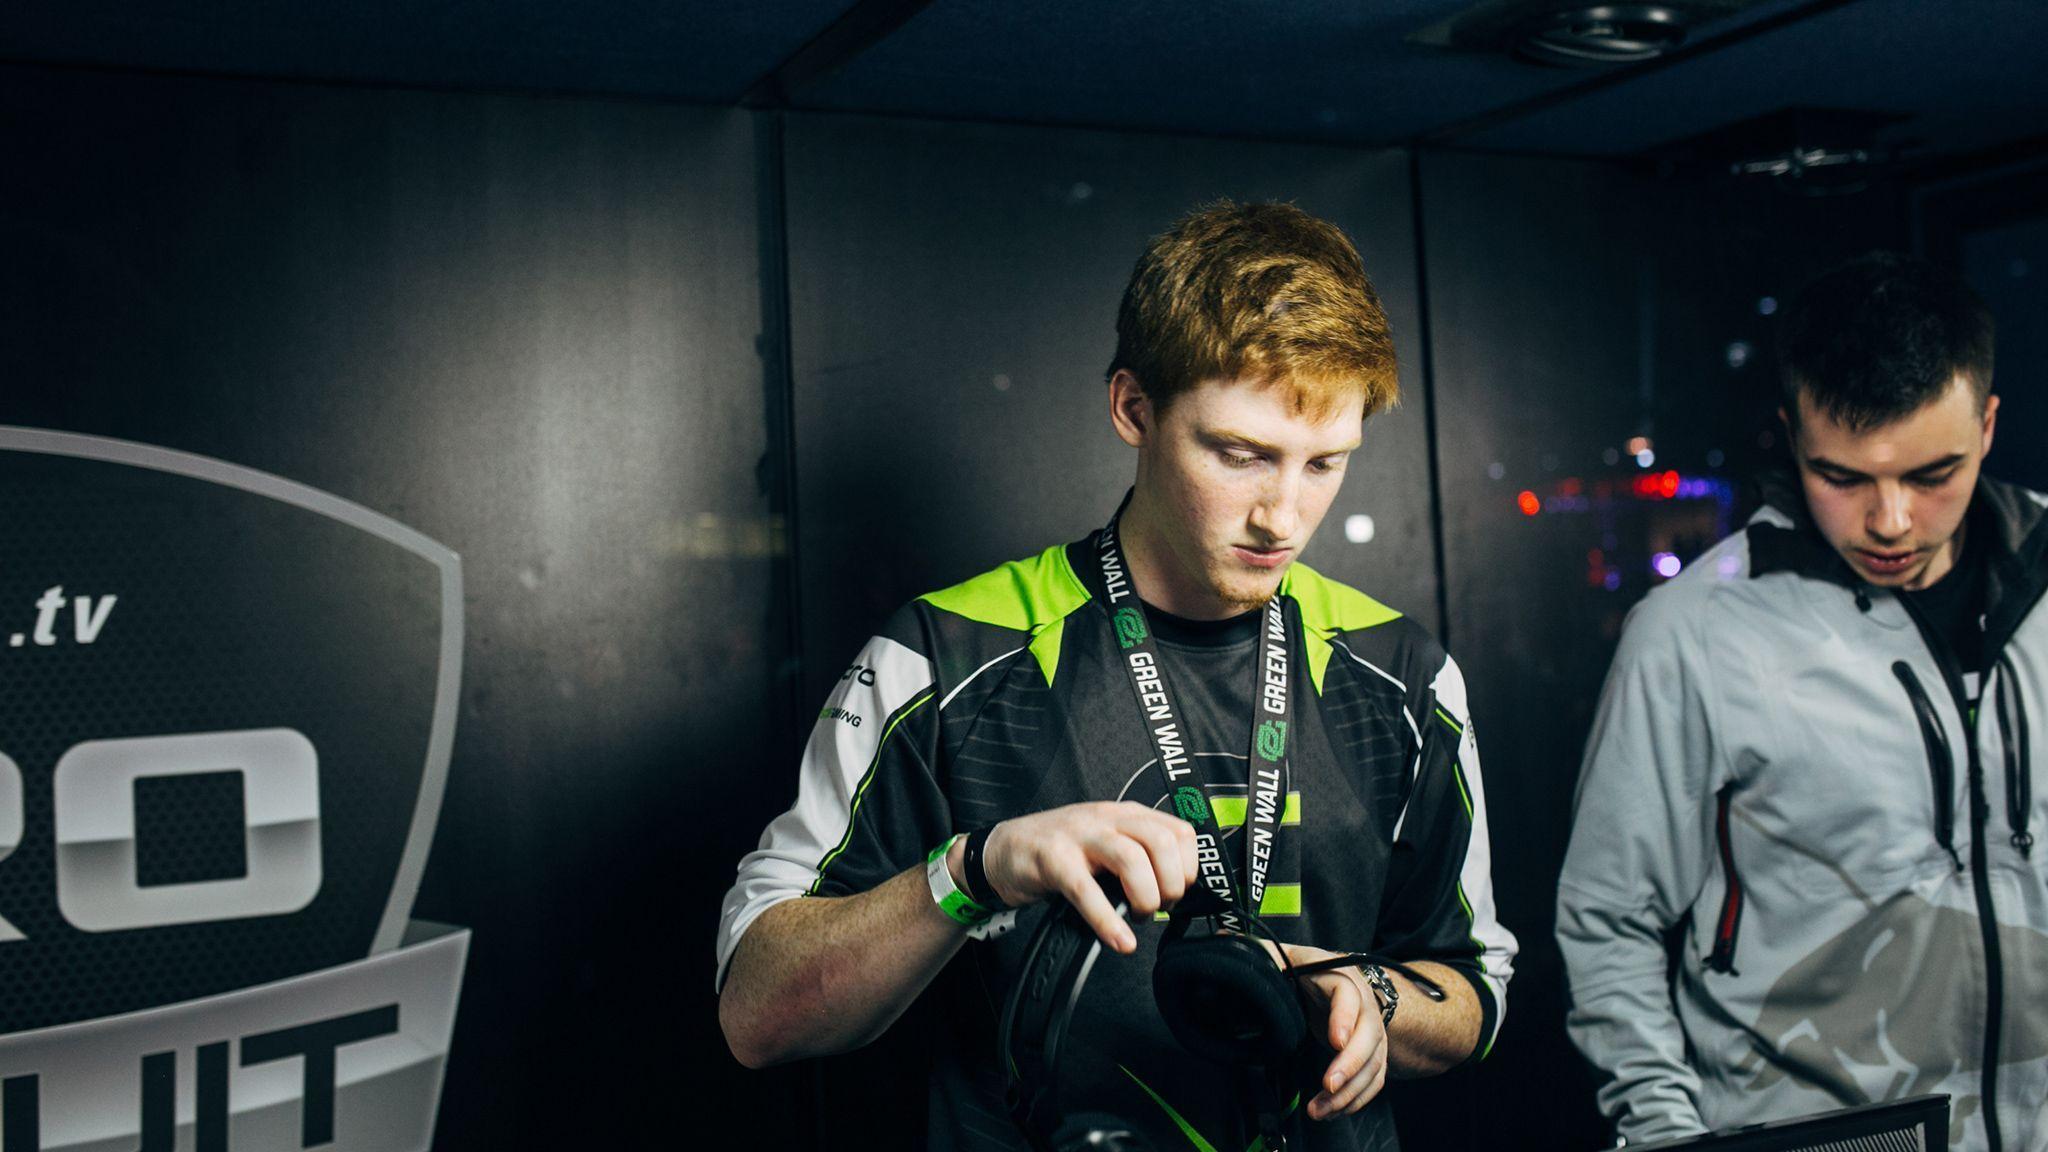 Game Wallpaper: Optic Gaming Roster Widescreen Wallpaper For HD